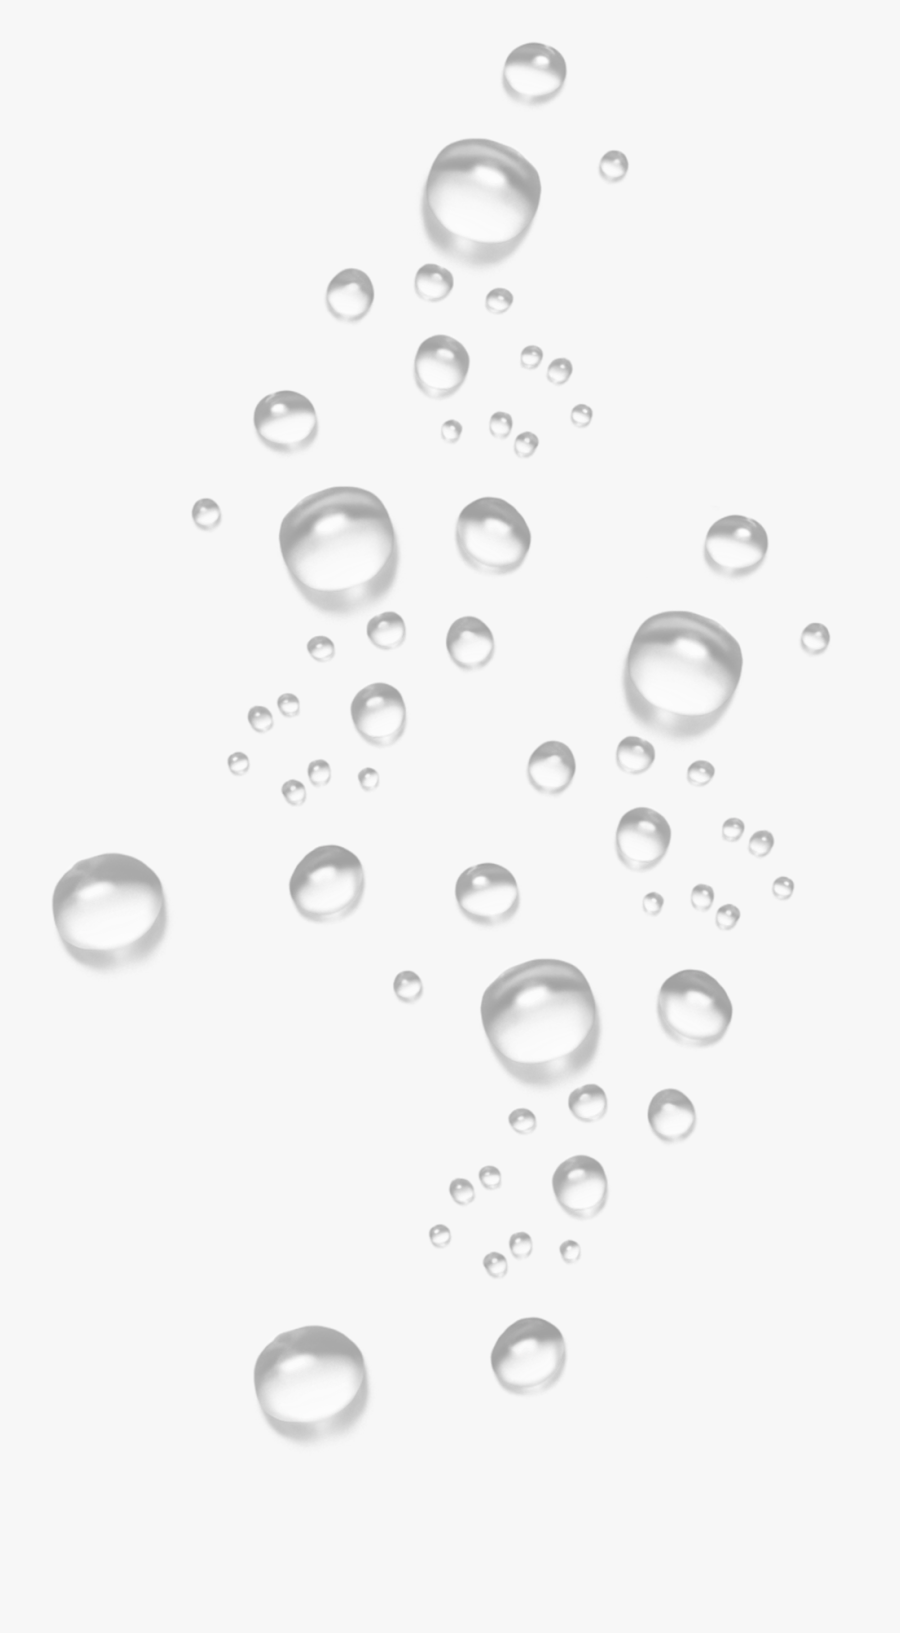 And Material Droplets Drop Water Translucency Transparency - Bubbles Png, Transparent Clipart